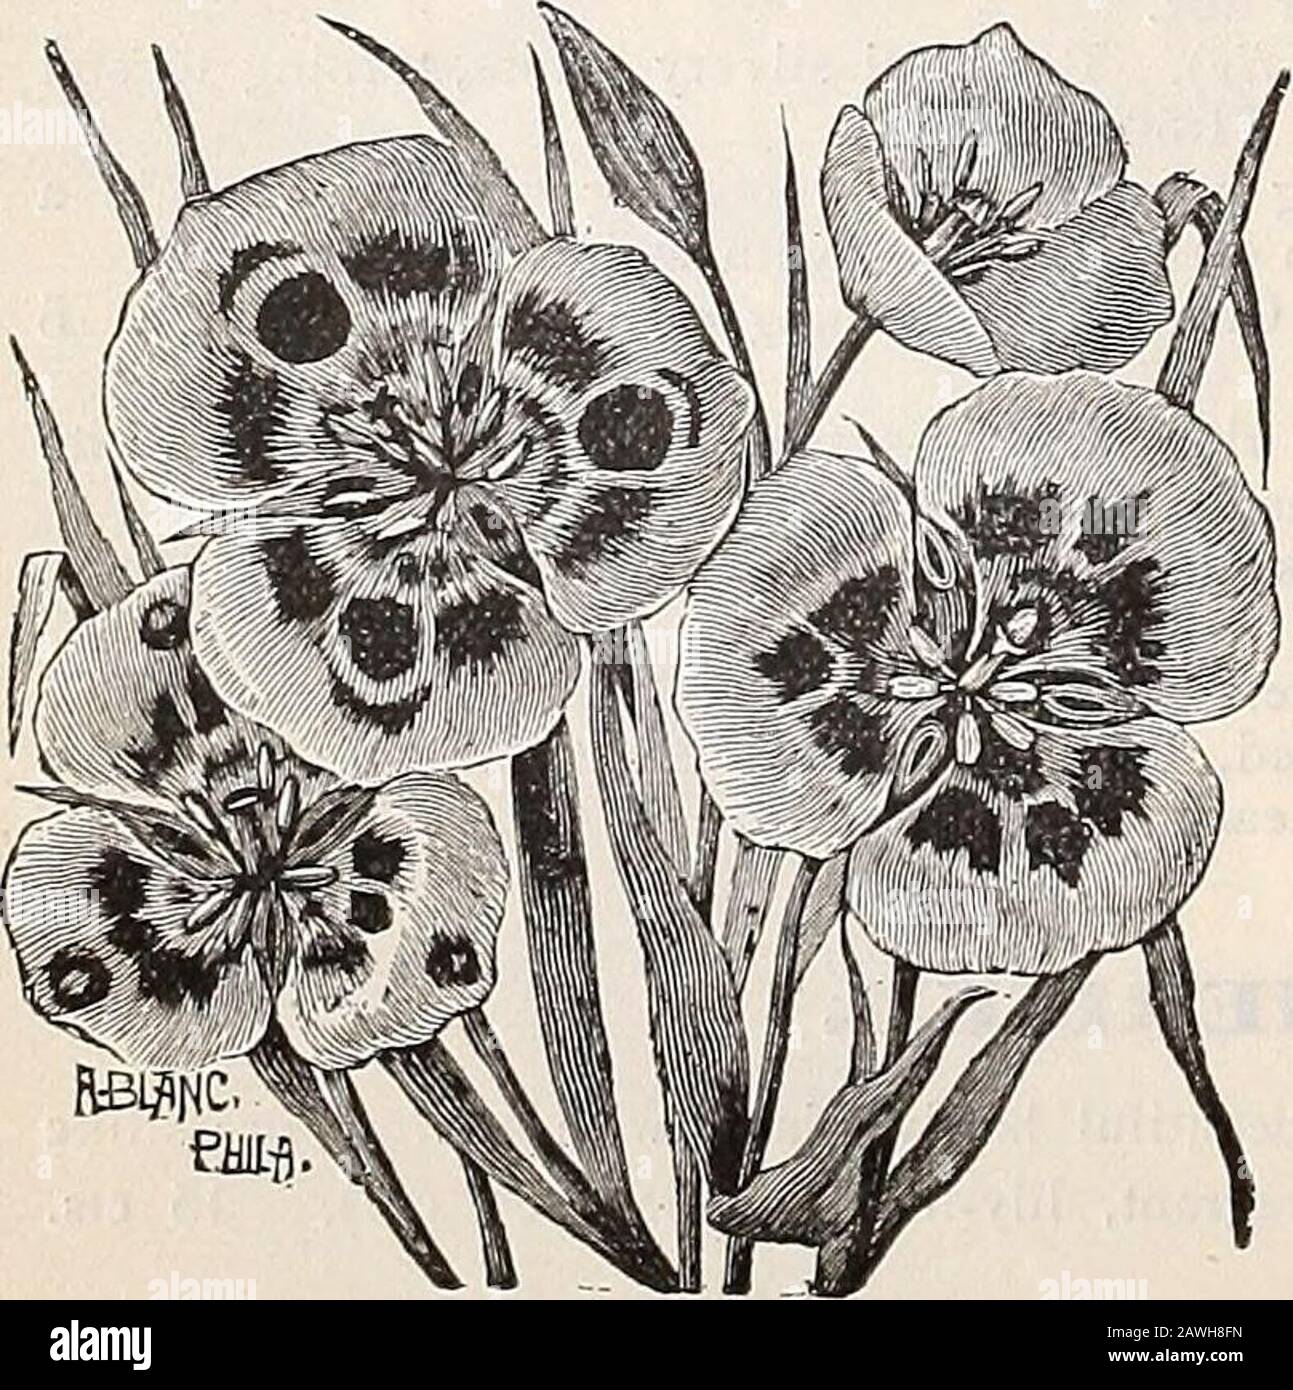 Dreer's autumn catalogue : 1899 bulbs plants, seeds, etc . Double Anemones.. Calochortus. odd arrangement.per doz. Mixed Varieties. In many beauti-ful colors. 3 for 8 cts., 25 cts. per doz.,§1.50 per 100. CALOCHORTUS (^Mariposa, or B titter fly Ttdip). Very beautiful California bulbs, bloom-ing in summer. The flowers are of richand brilliant colors in various shades ofwhite, purple, and yellow, borne on stiff,slender stalks, 8 to 20 inches hi,:;;h, from afew to 15 or 20 flowers on a stalk.Mixed. A selection of the hardiest varieties. 3 for 10 cts., 30 cts. per doz., $2.00 per 100. % Doz. Doz. Stock Photo